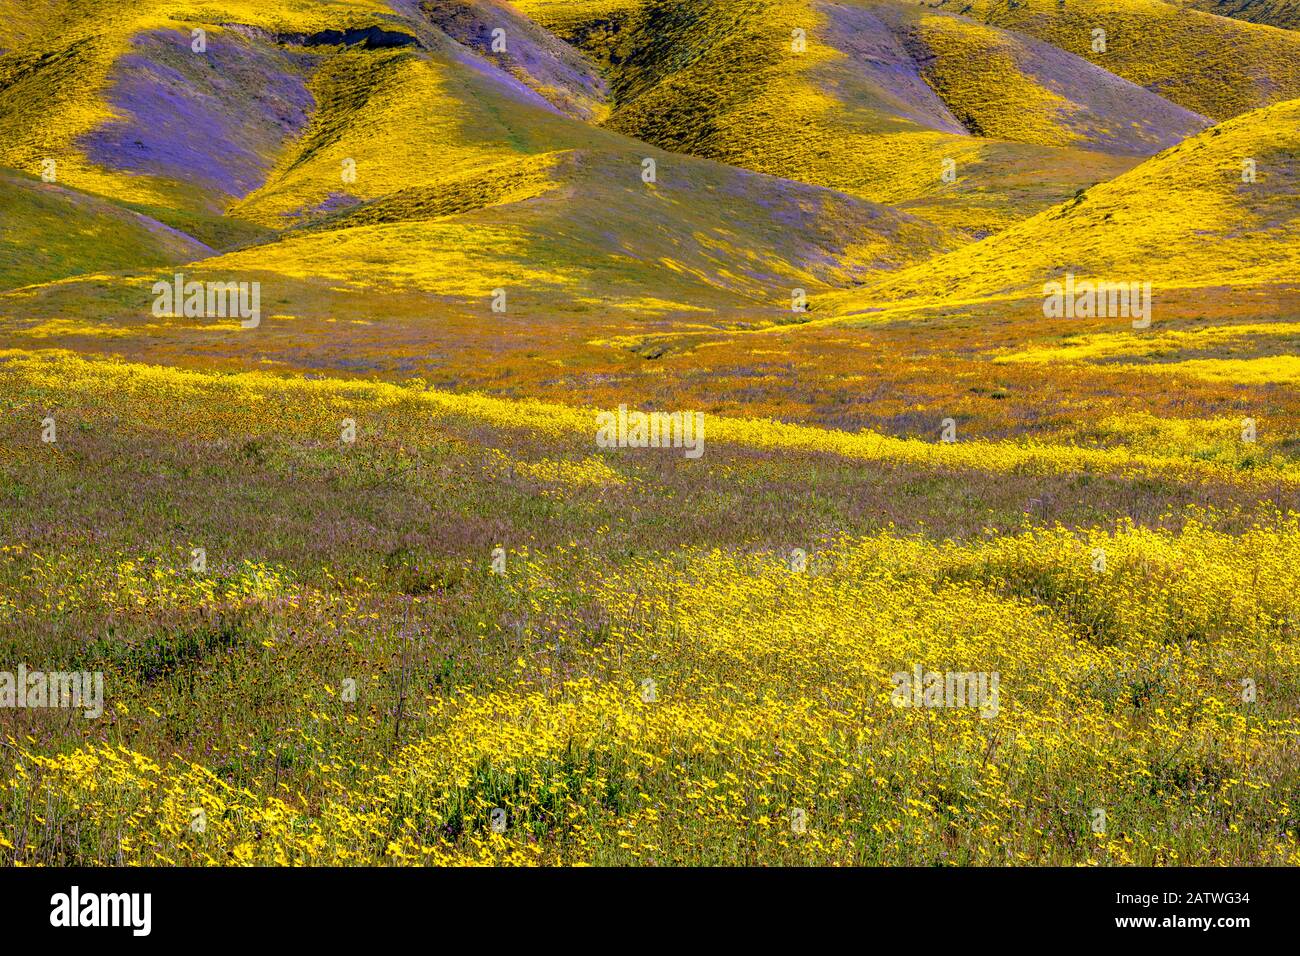 Steep valleys in the foothills of the Temblor Range, carpeted with Coreopsis (yellow) and Phacelia (purple) with patches of orange California poppy (Eschscholzia californica). Carrizo Plain, California, USA. 31st March 2019. Stock Photo